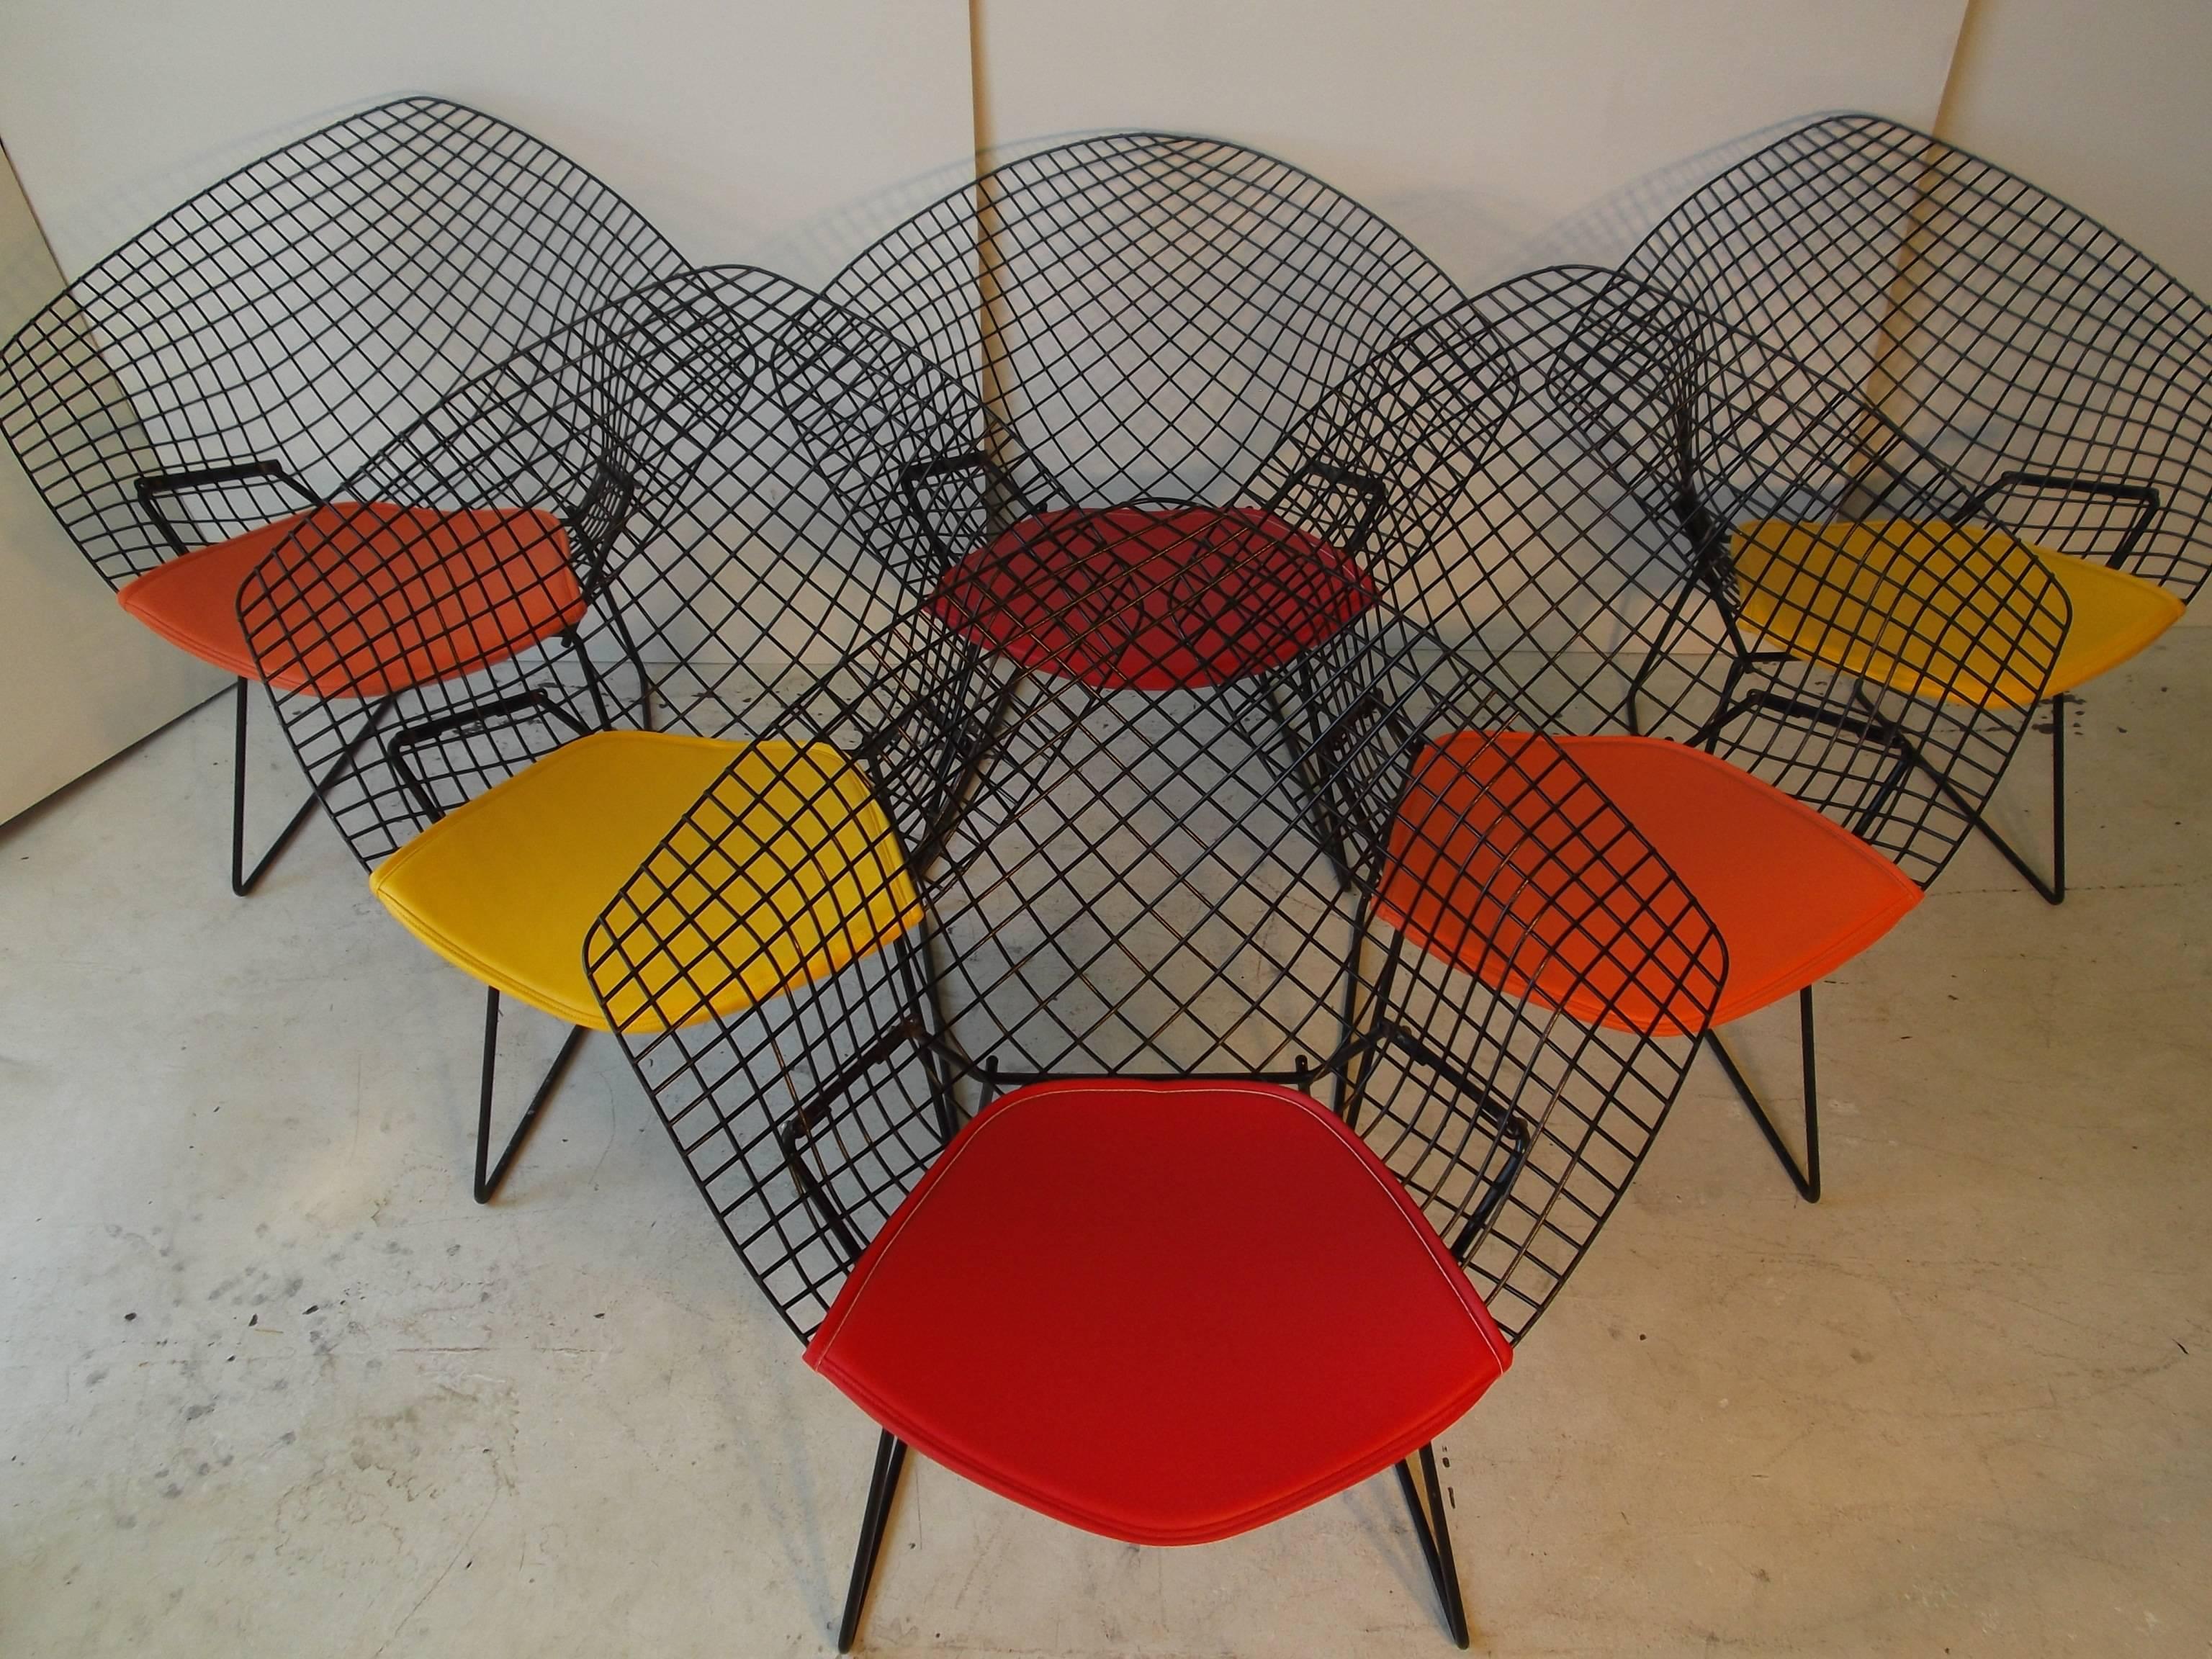 Price is for two chairs. I have available six vintage 1950s Harry Bertoia wire diamond chairs for Knoll, furniture. They have new pads, and are ready to go. Great outdoors or inside! These have old paint with some minor losses. Sold in Pairs with